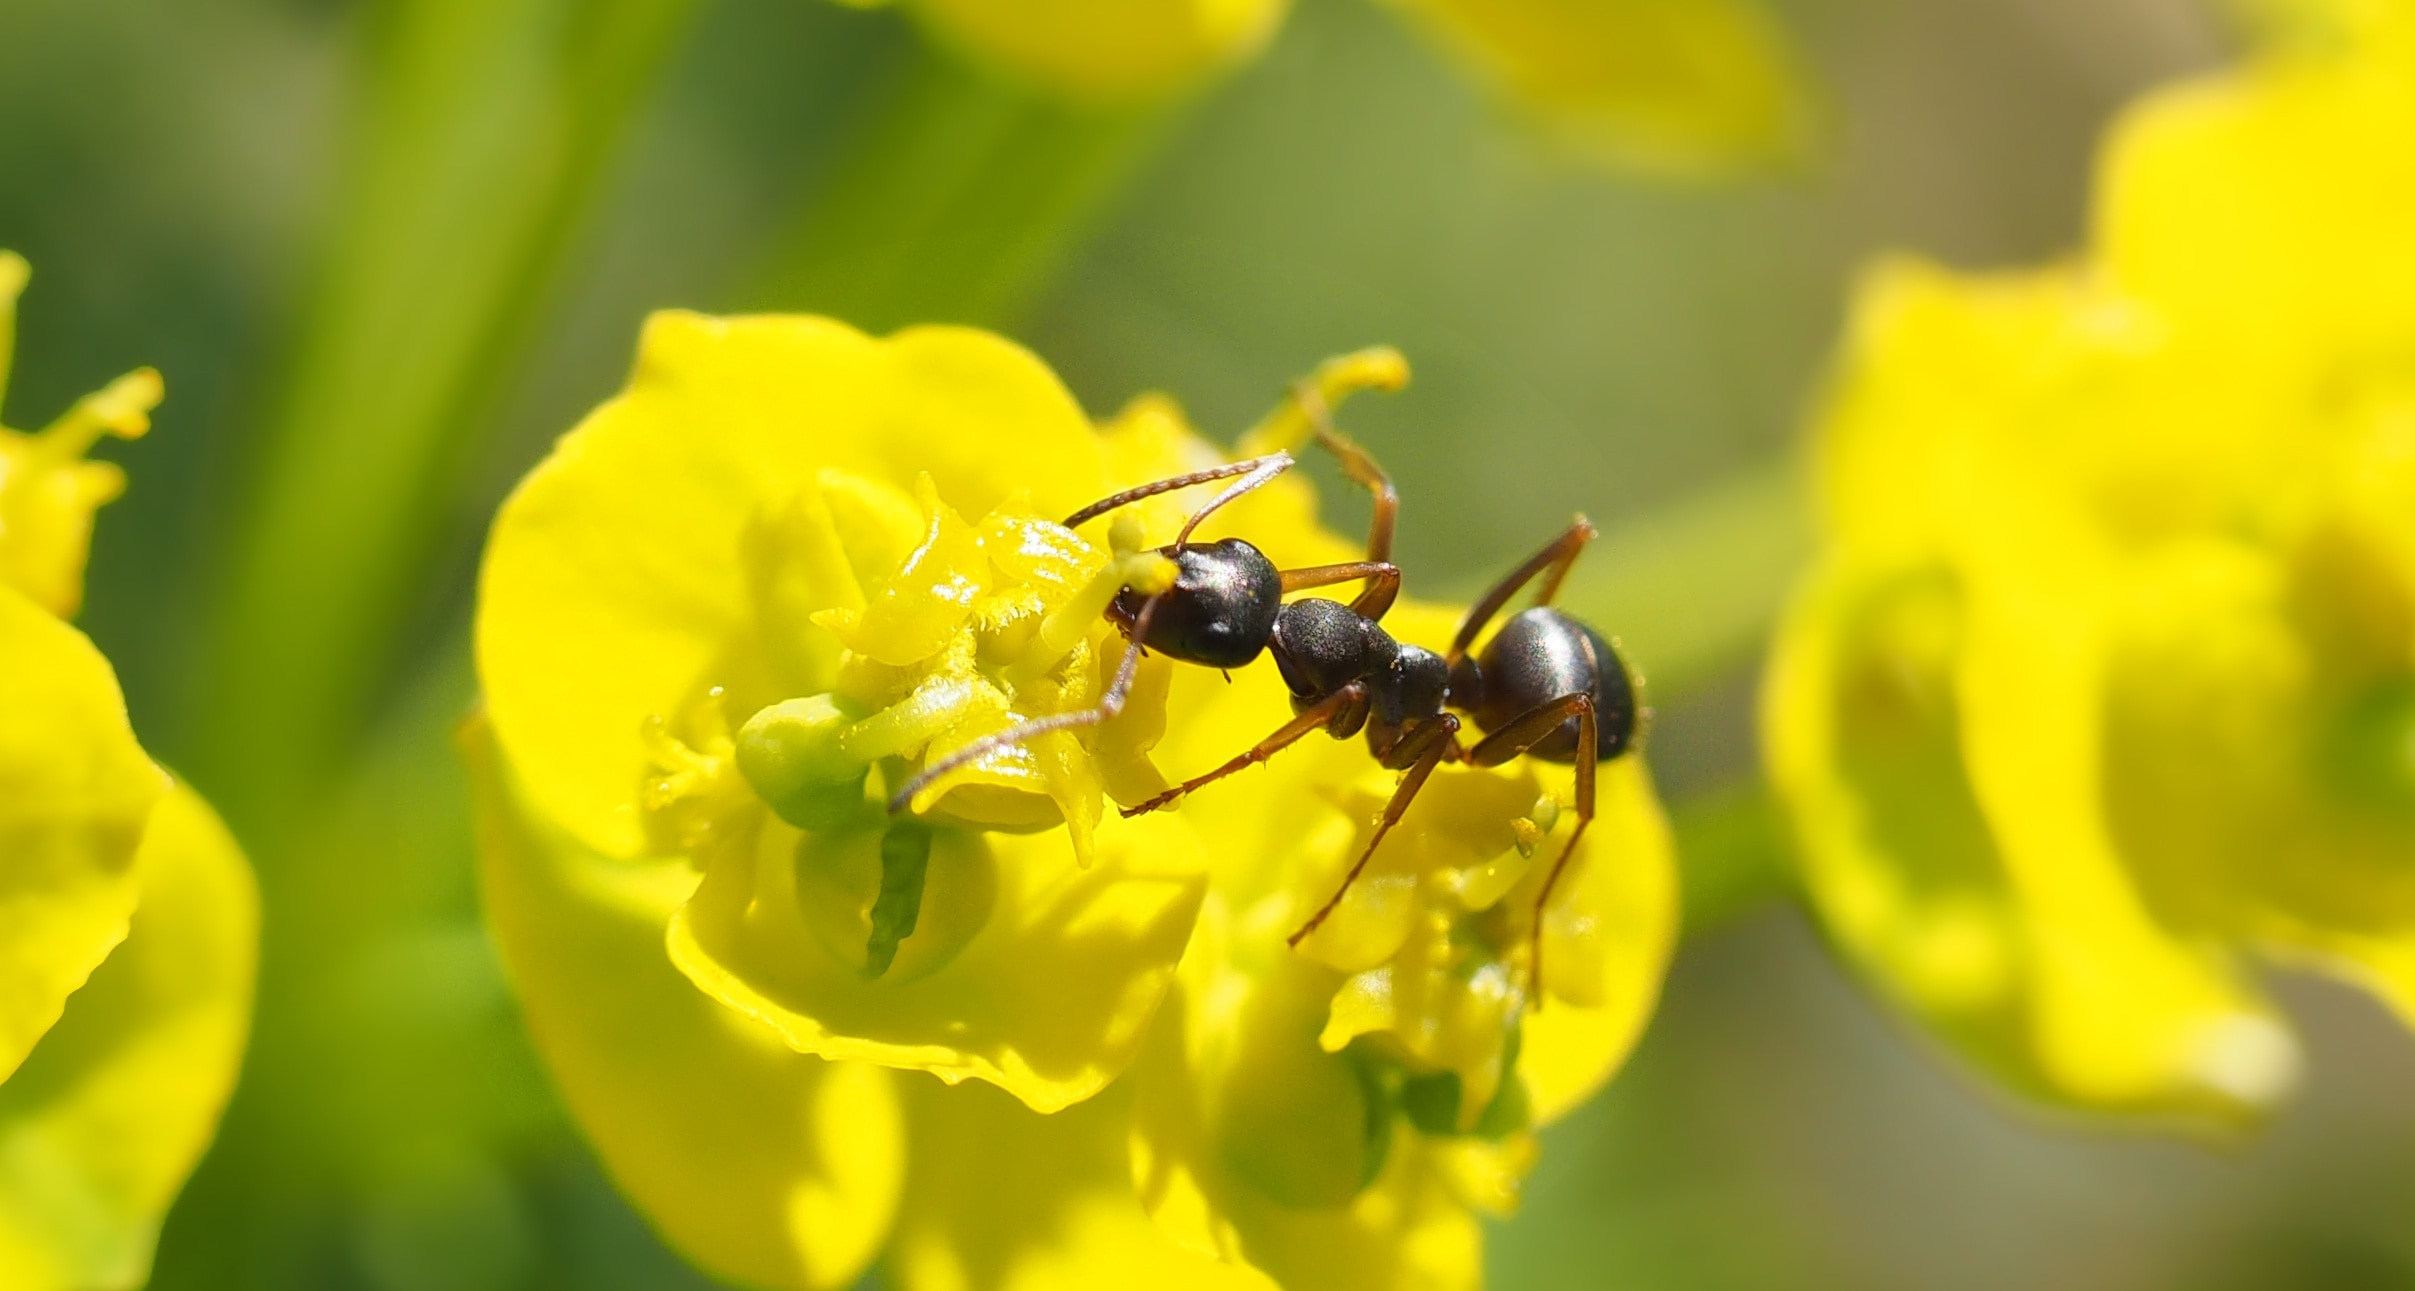 black bullet ant perched on yellow petaled flower